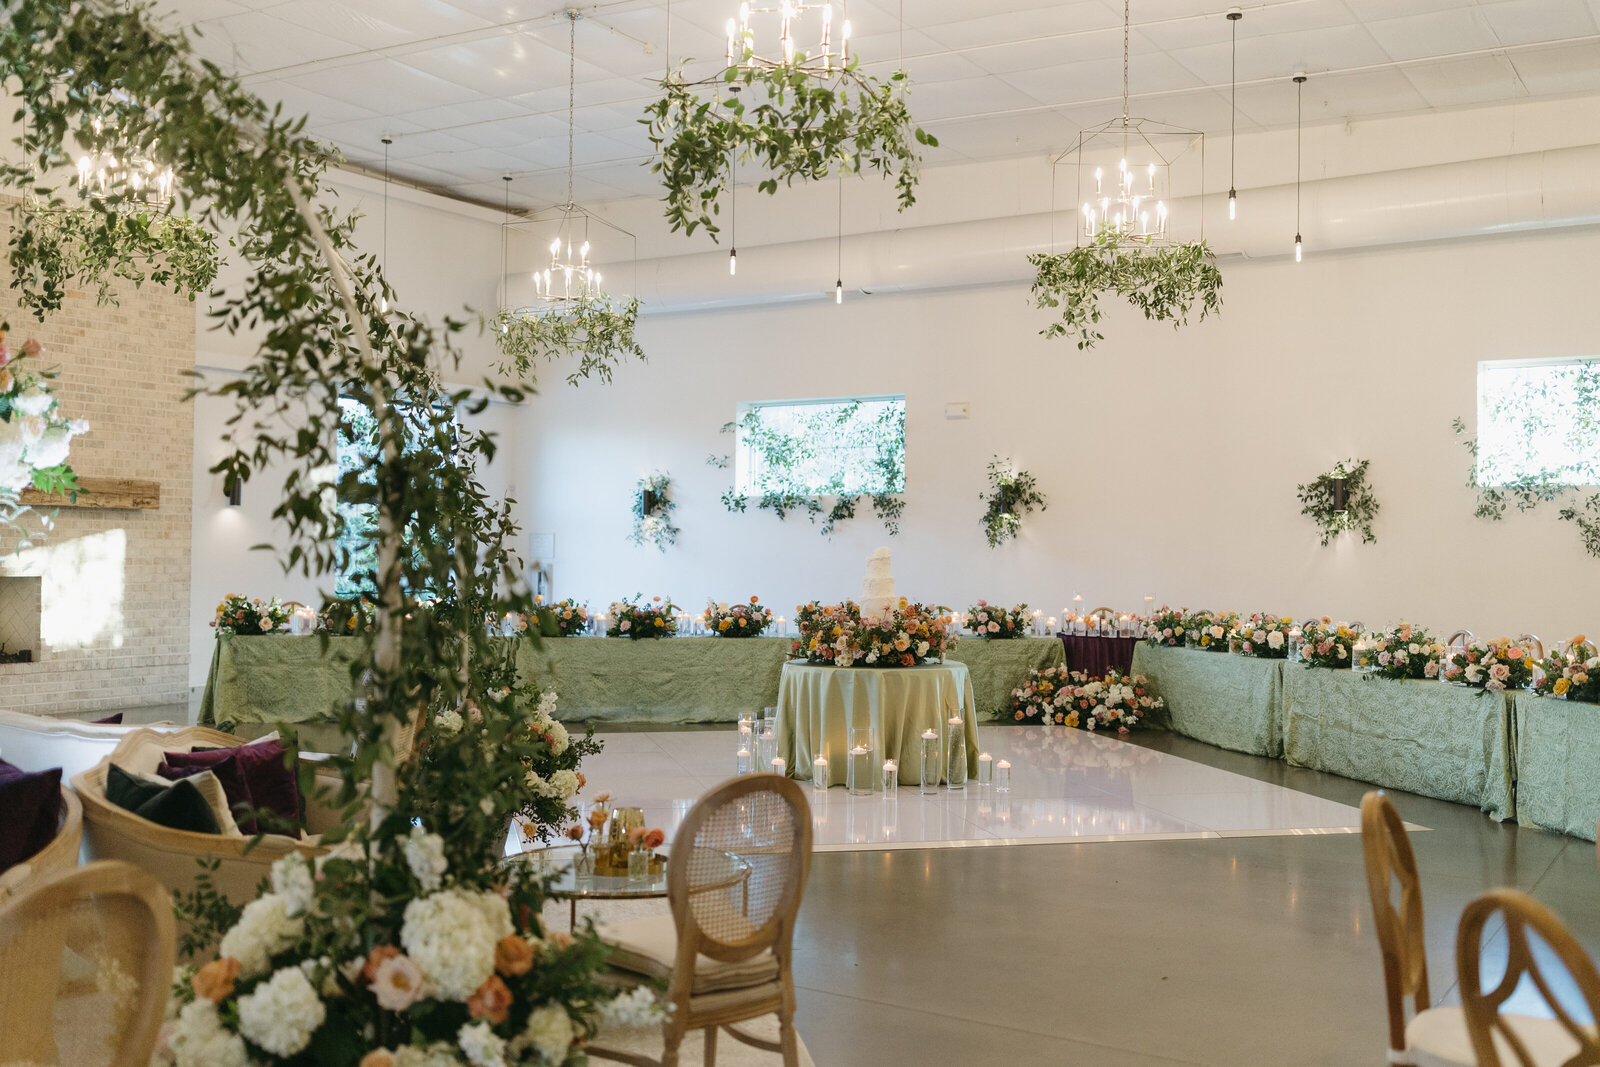 White dance floor and greenery in The Great Room